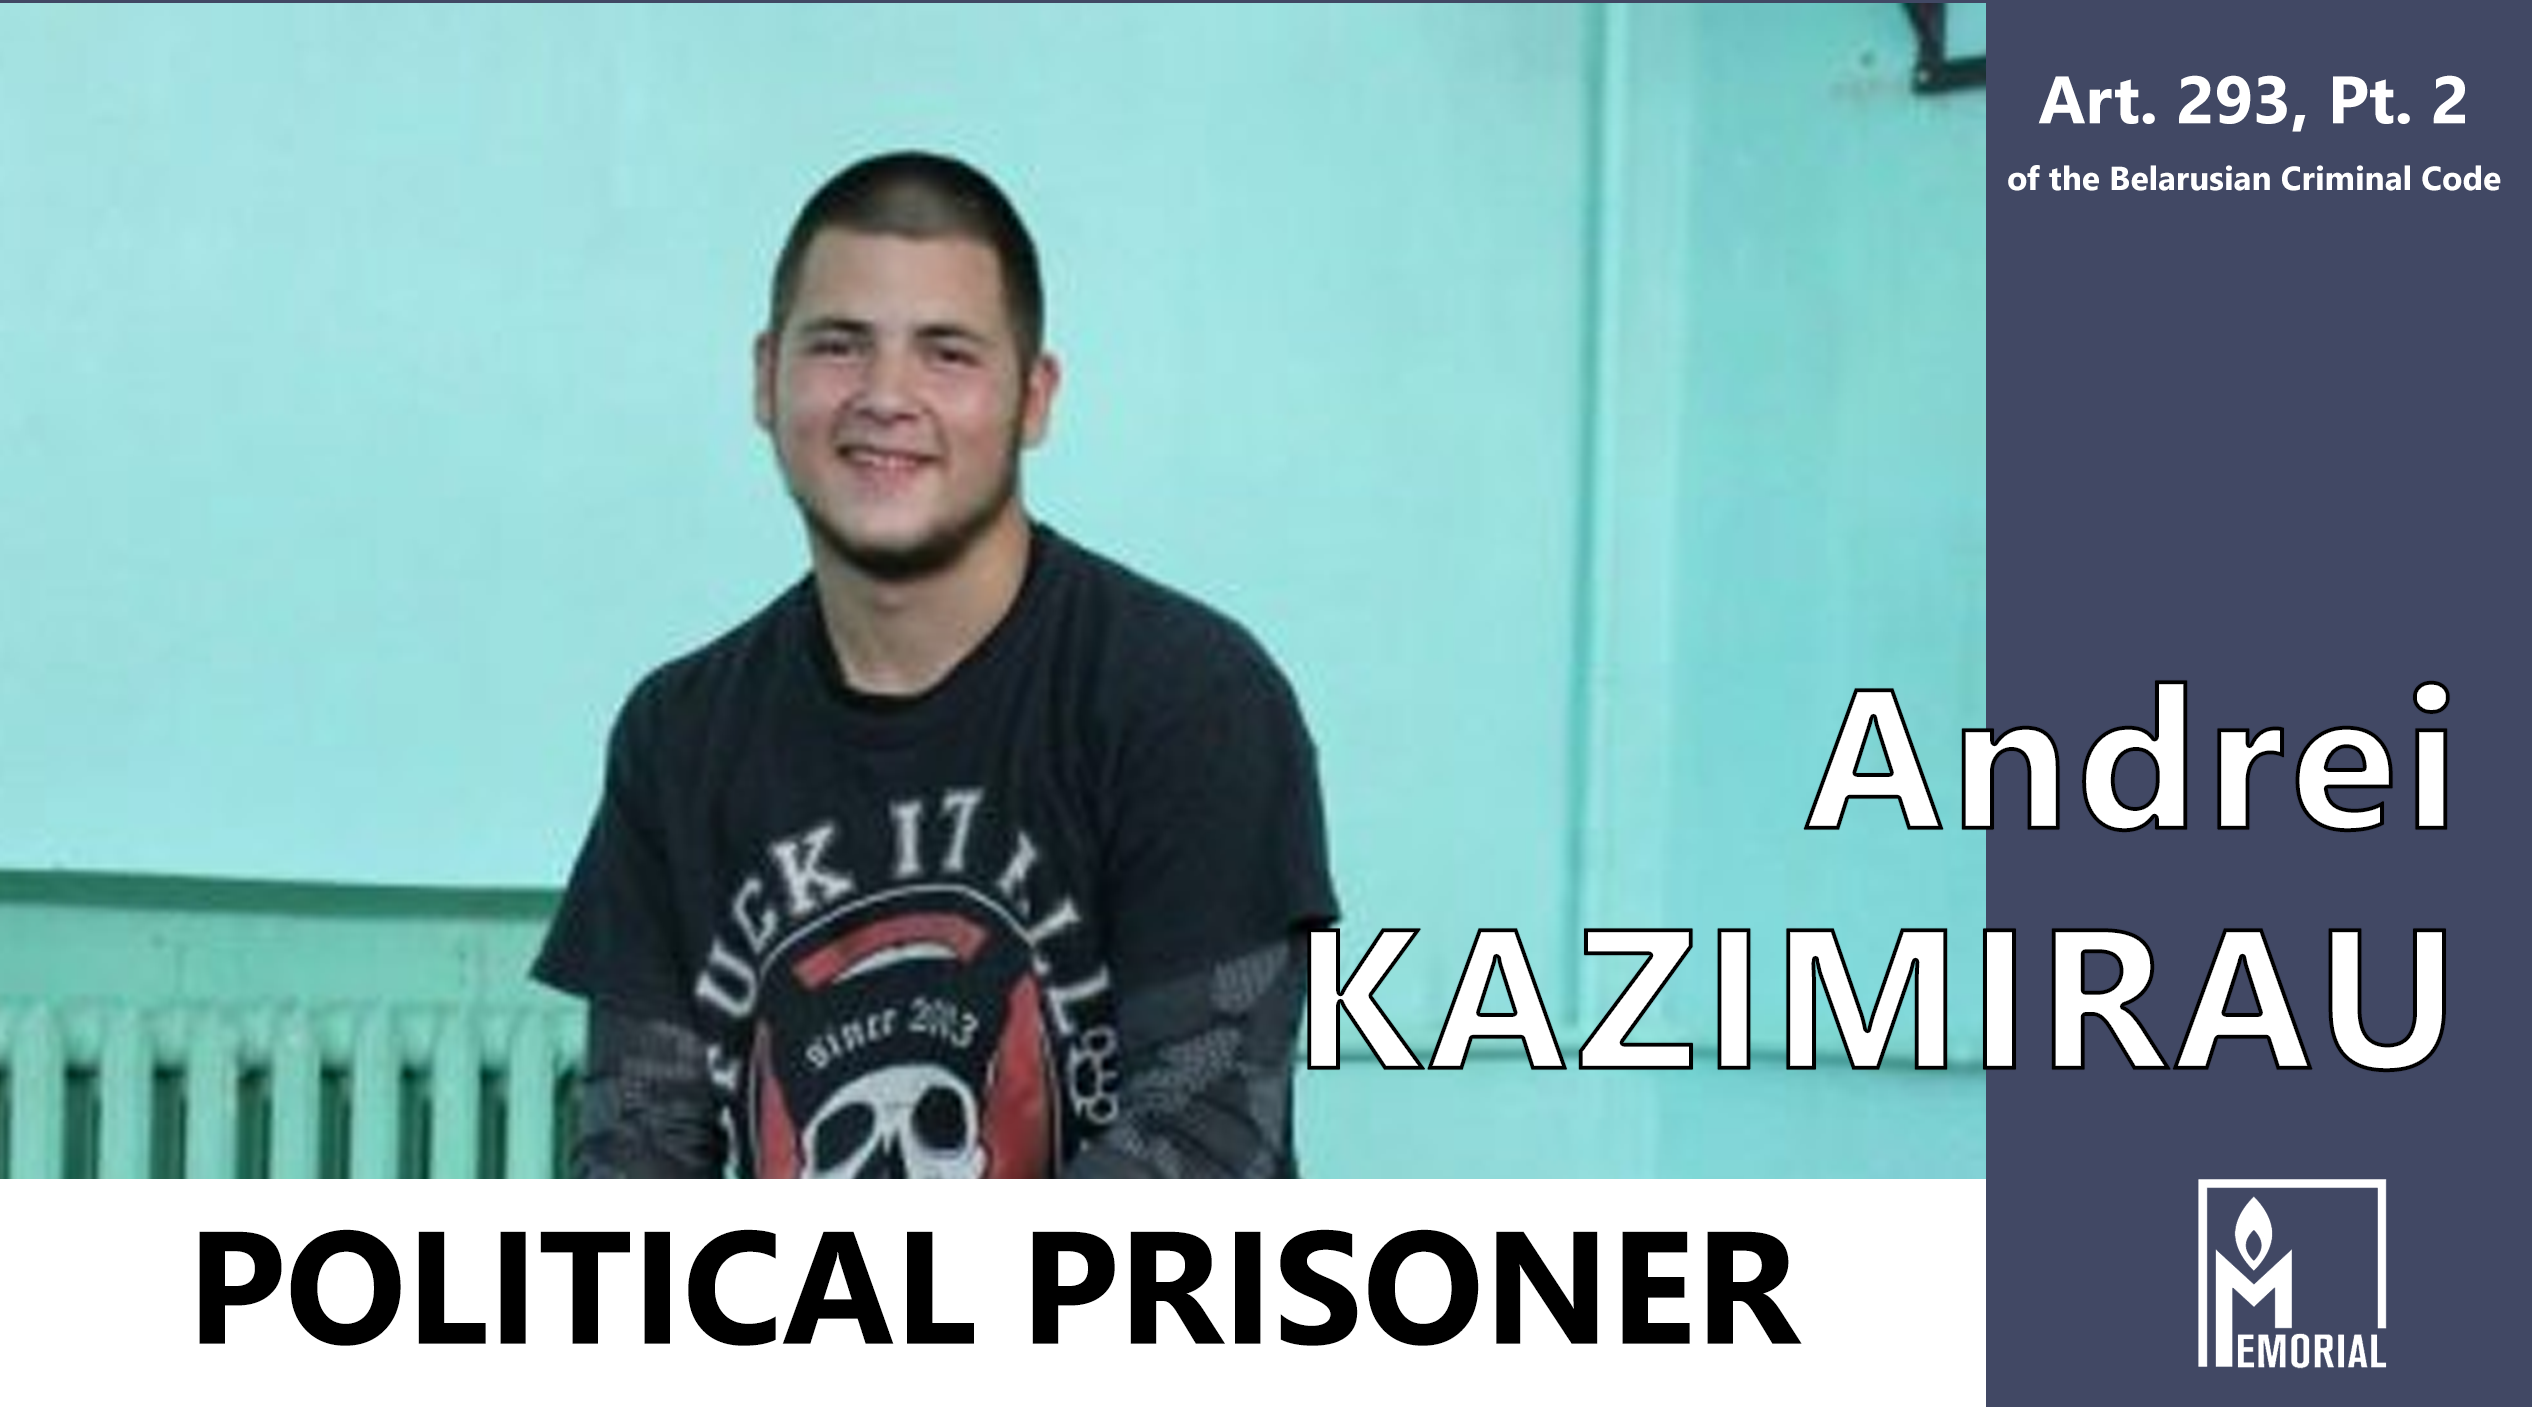 Andrei Kazimirau, a Belarusian citizen facing deportation from Russia for participating in anti-Lukashenka protests, is a political prisoner